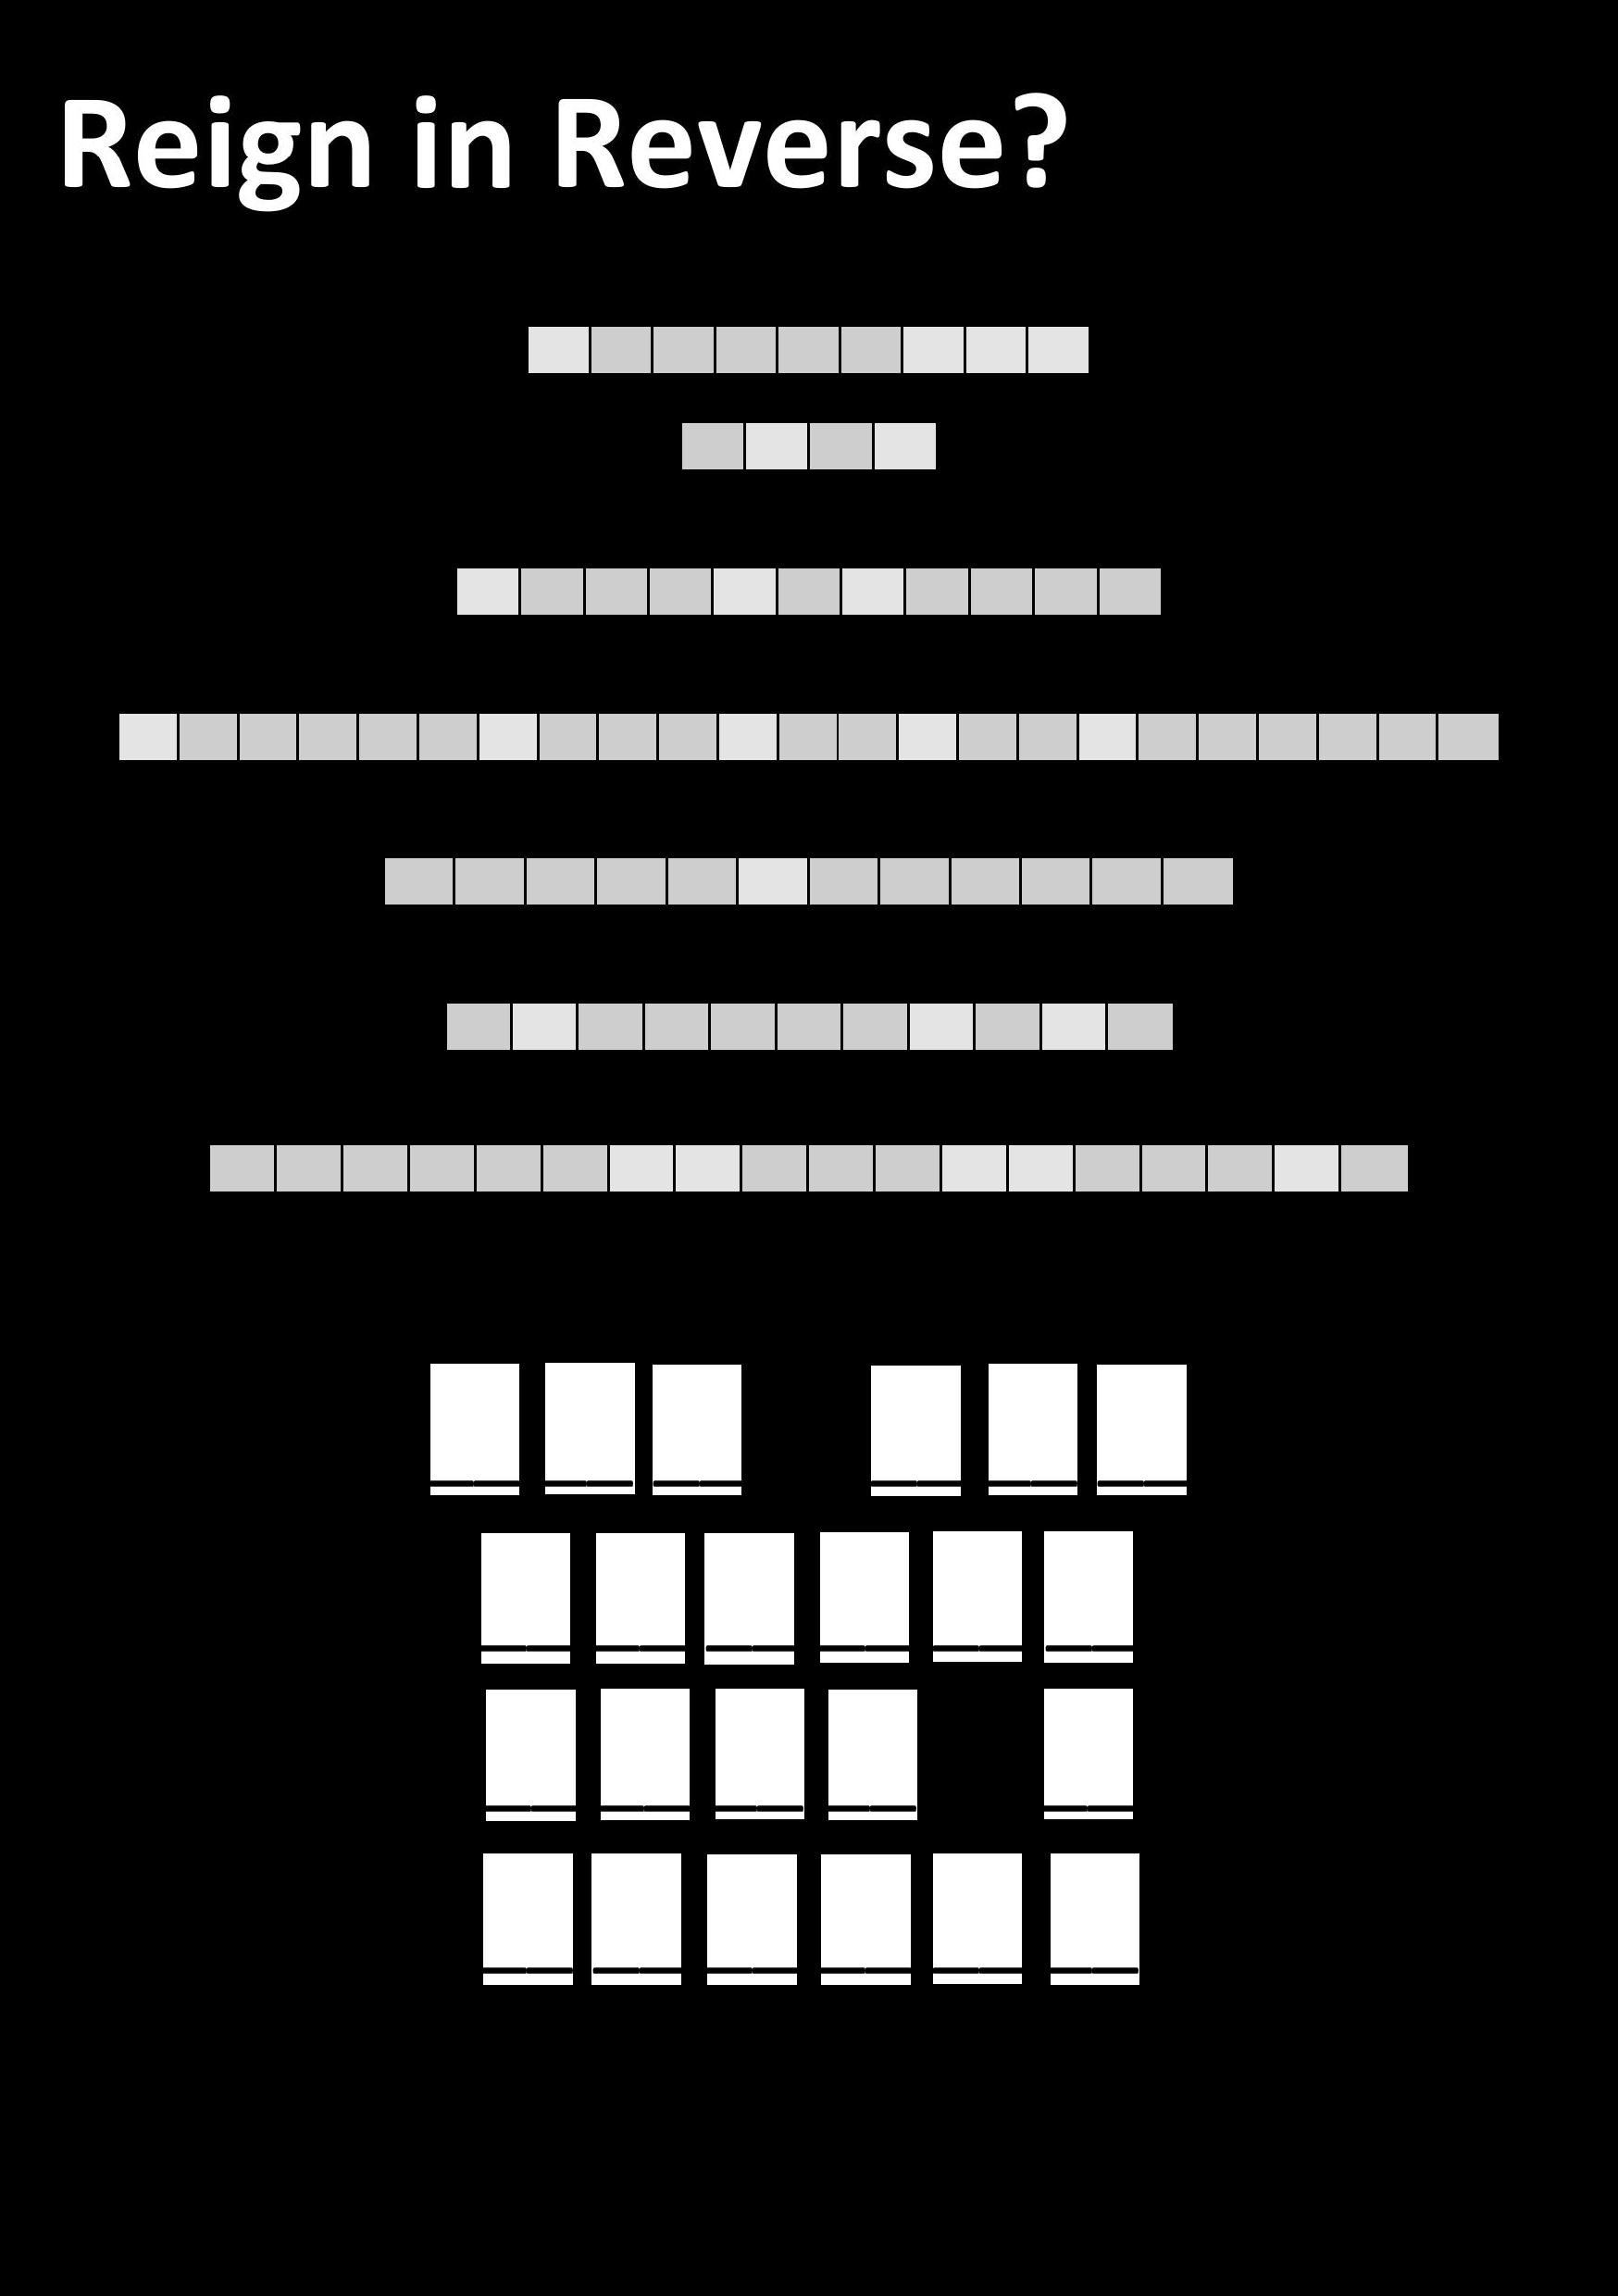 puzzles for the road (31 Reign in Reverse).jpg